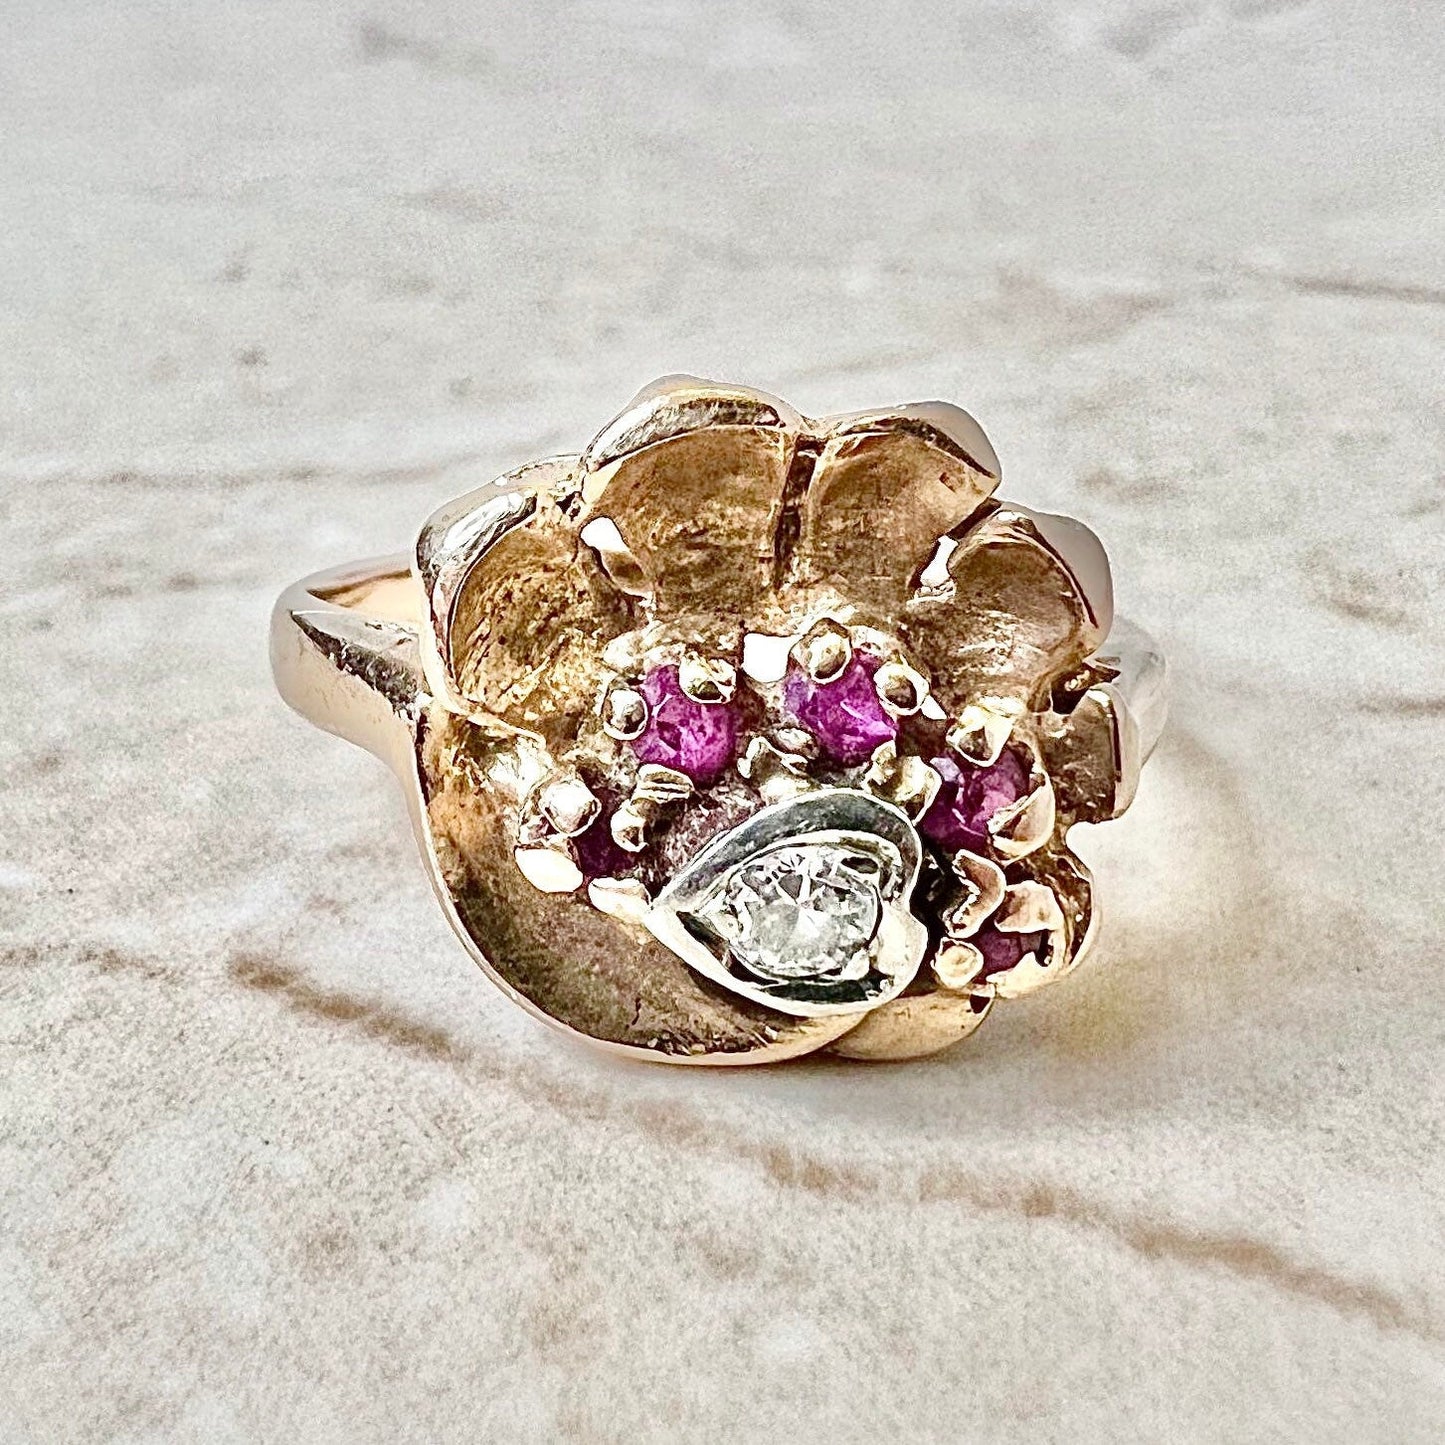 14K Vintage Retro Diamond & Ruby Seashell Cocktail Ring - Rose Gold Ruby Ring - Heart Ring - Gold Retro Ring - Valentine’s Day Gifts For Her